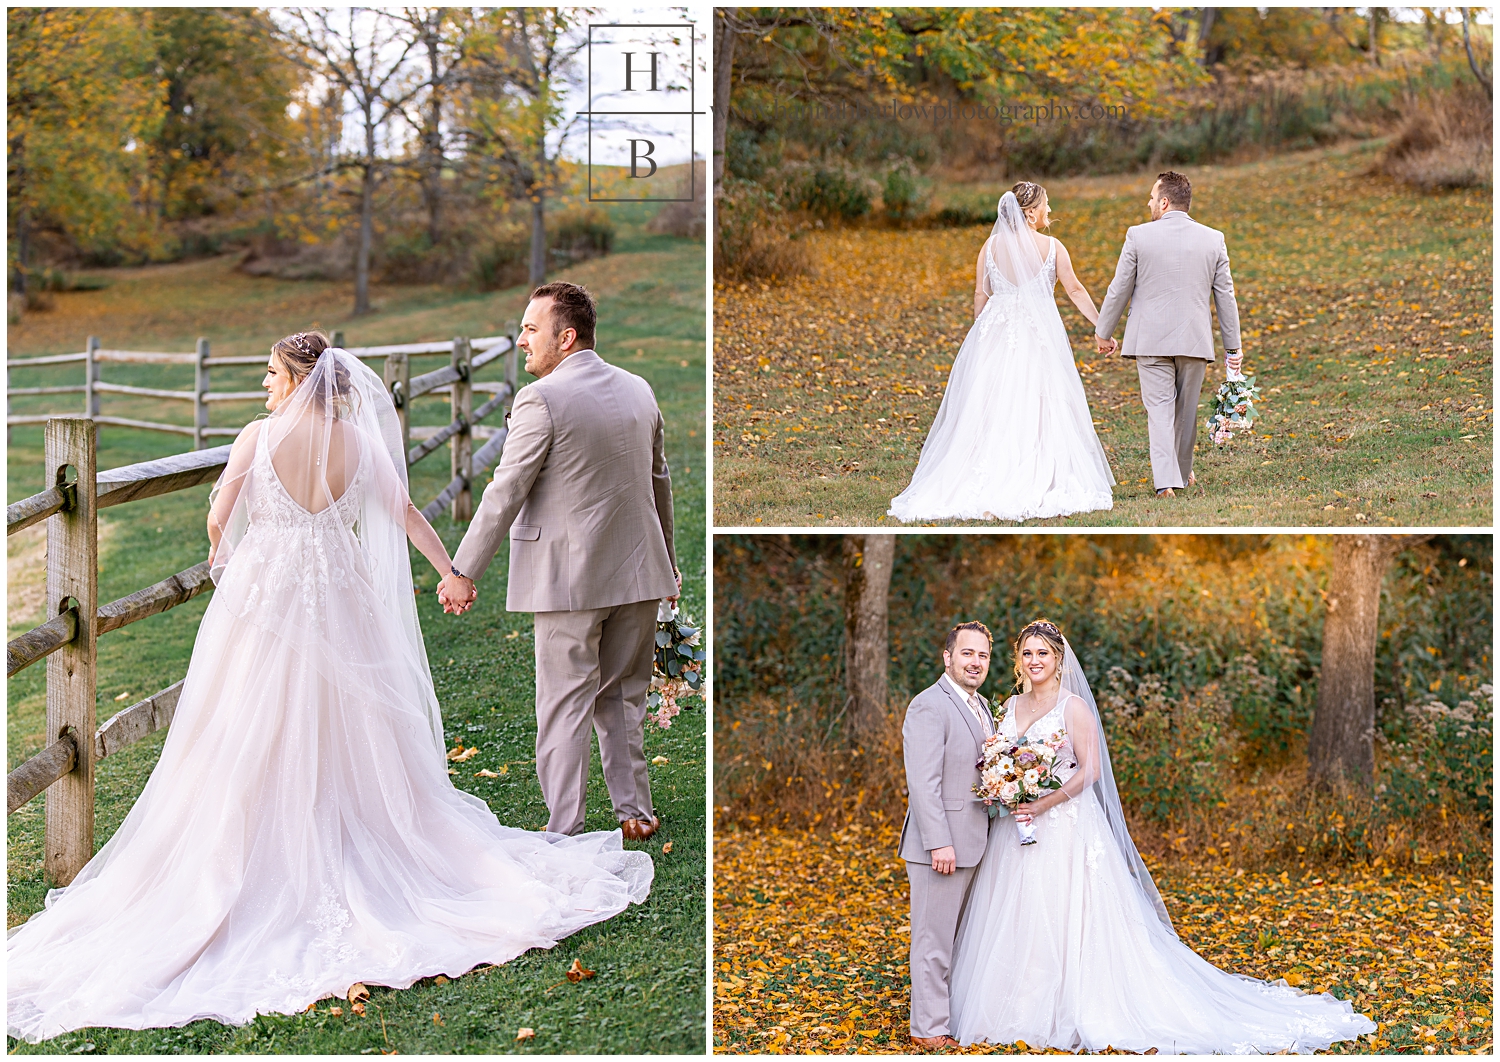 Bride and groom pose in orange fall leaves for wedding photos.